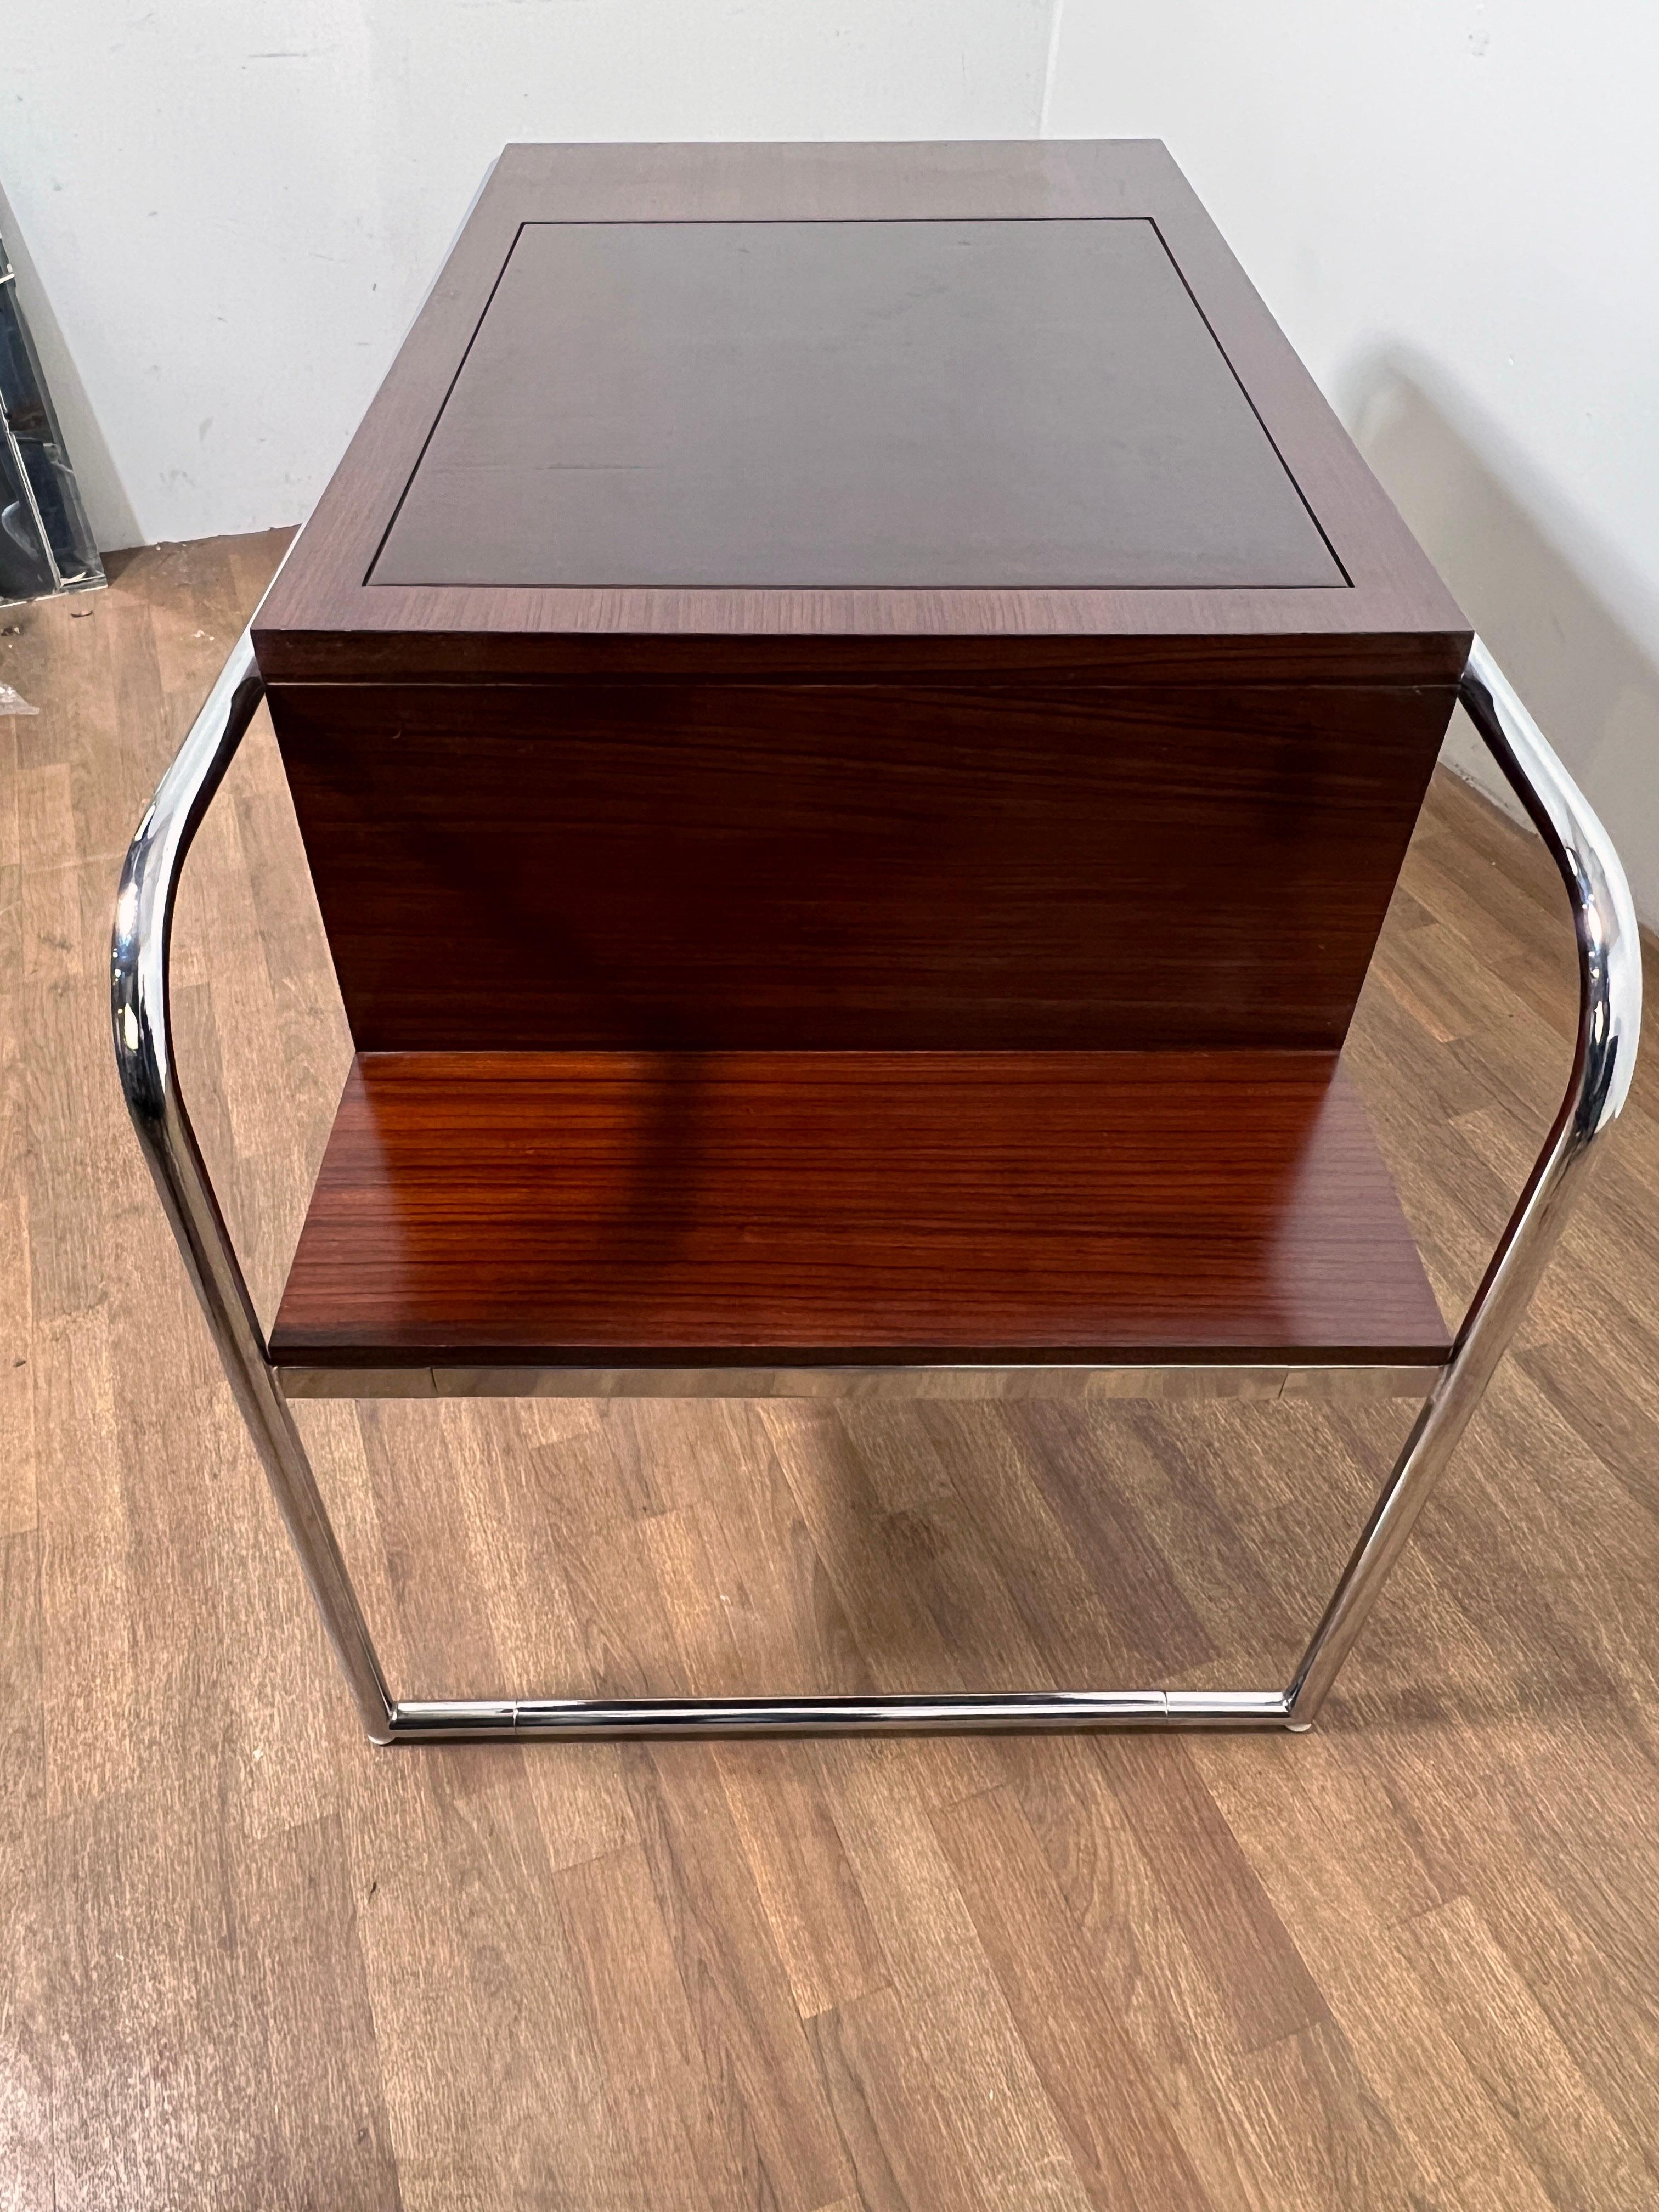 Ralph Lauren Bauhaus Inspired Desk in Rosewood, Chrome and Leather For Sale 3